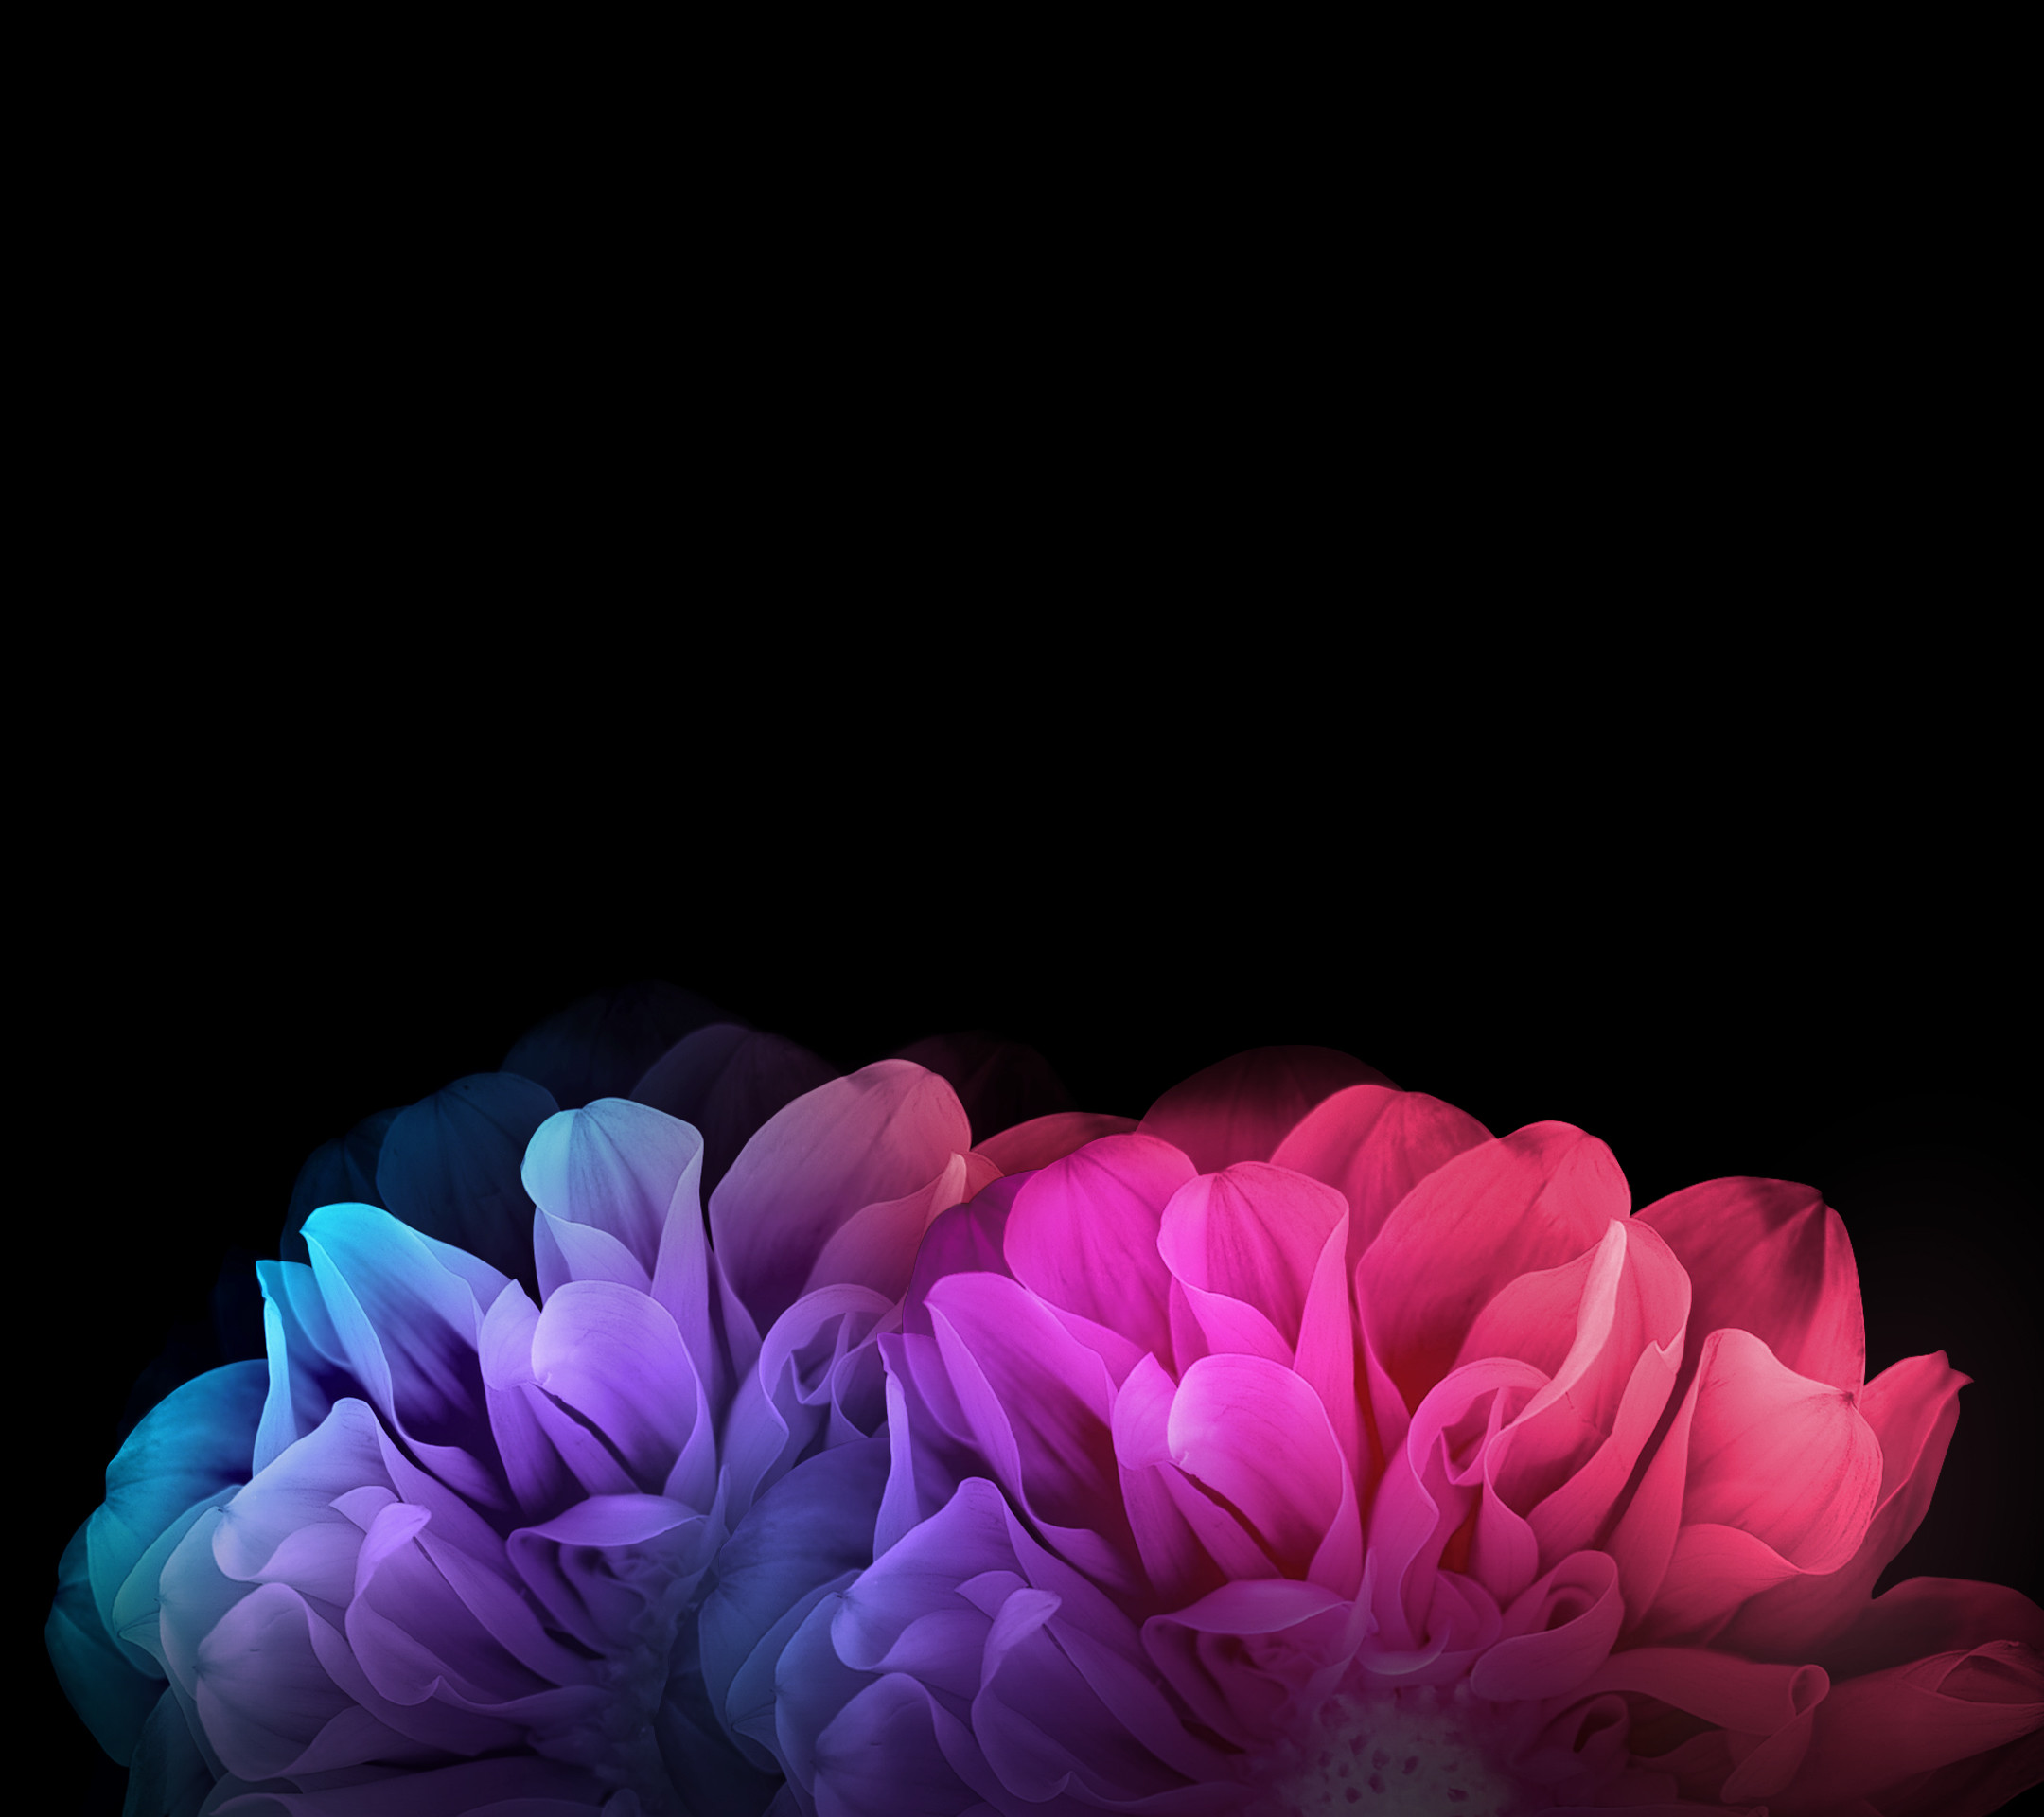 2160x1920 Image for LG G Flex 2 Wallpaper HD Abstract